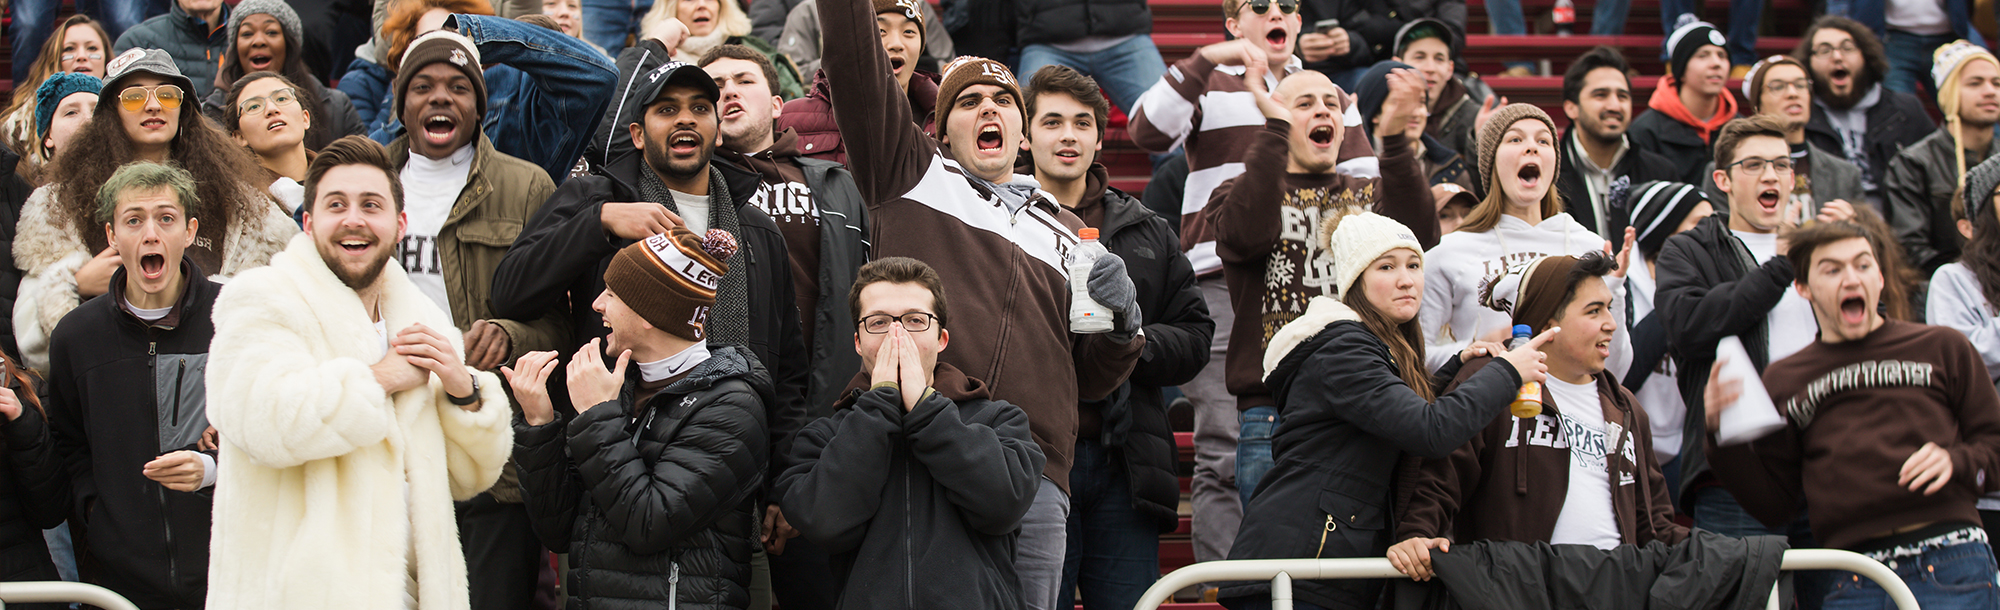 Lehigh fans in the stand